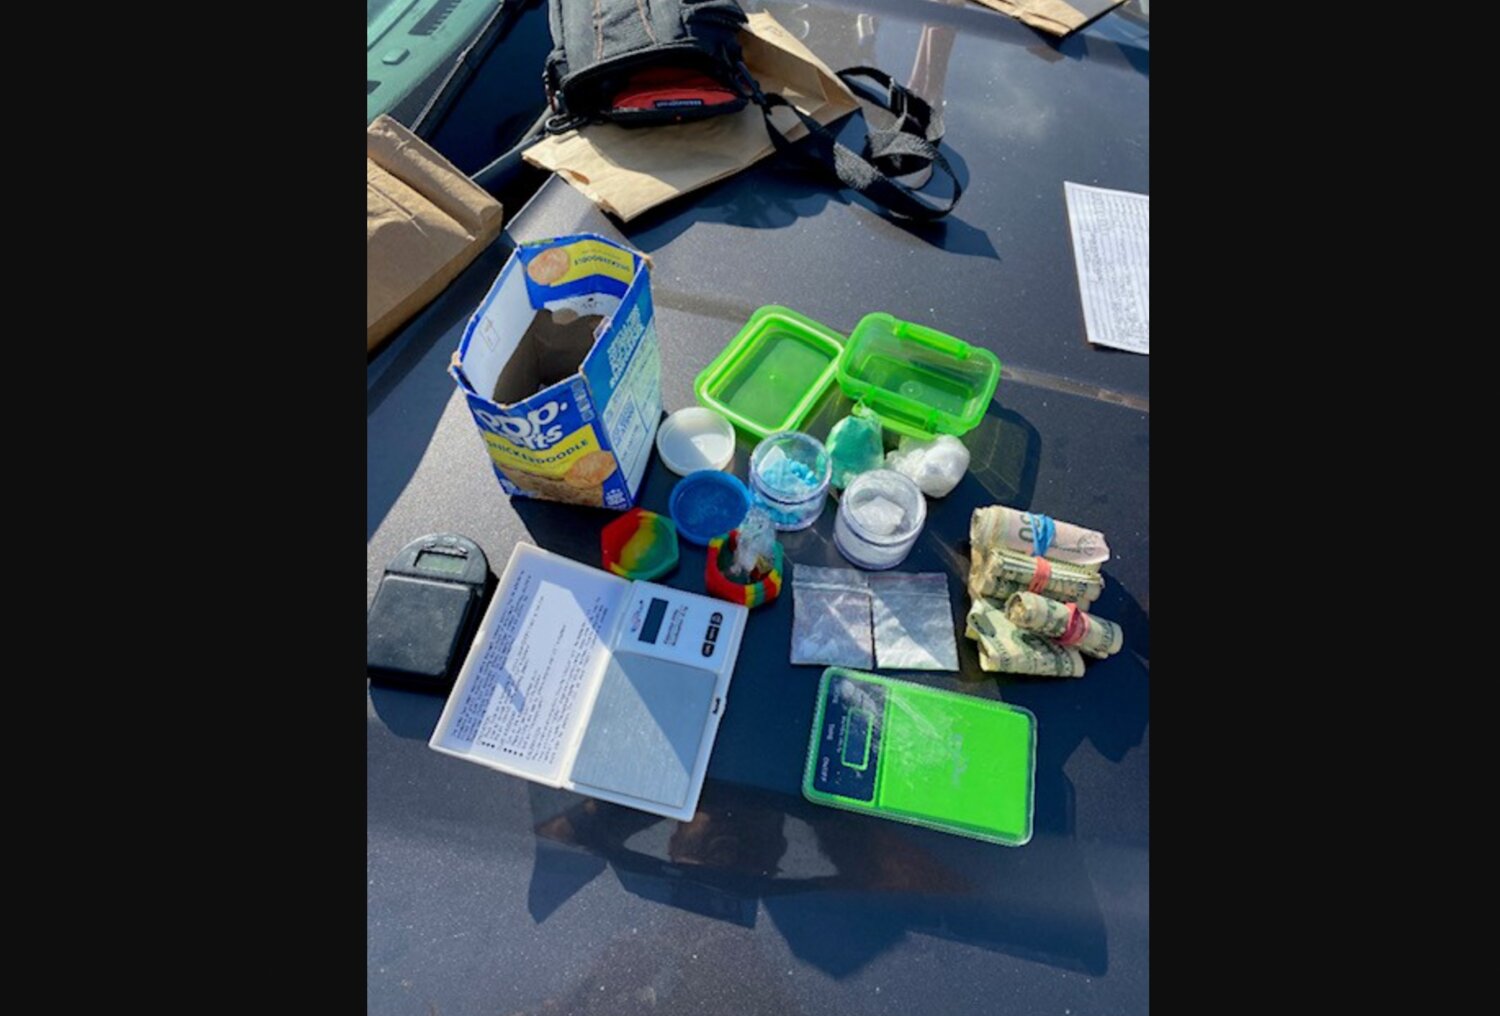 This photo, provided by the Lewis County Sheriff's Office, shows some of the items seized after a search warrant was served in Winlock Thursday.